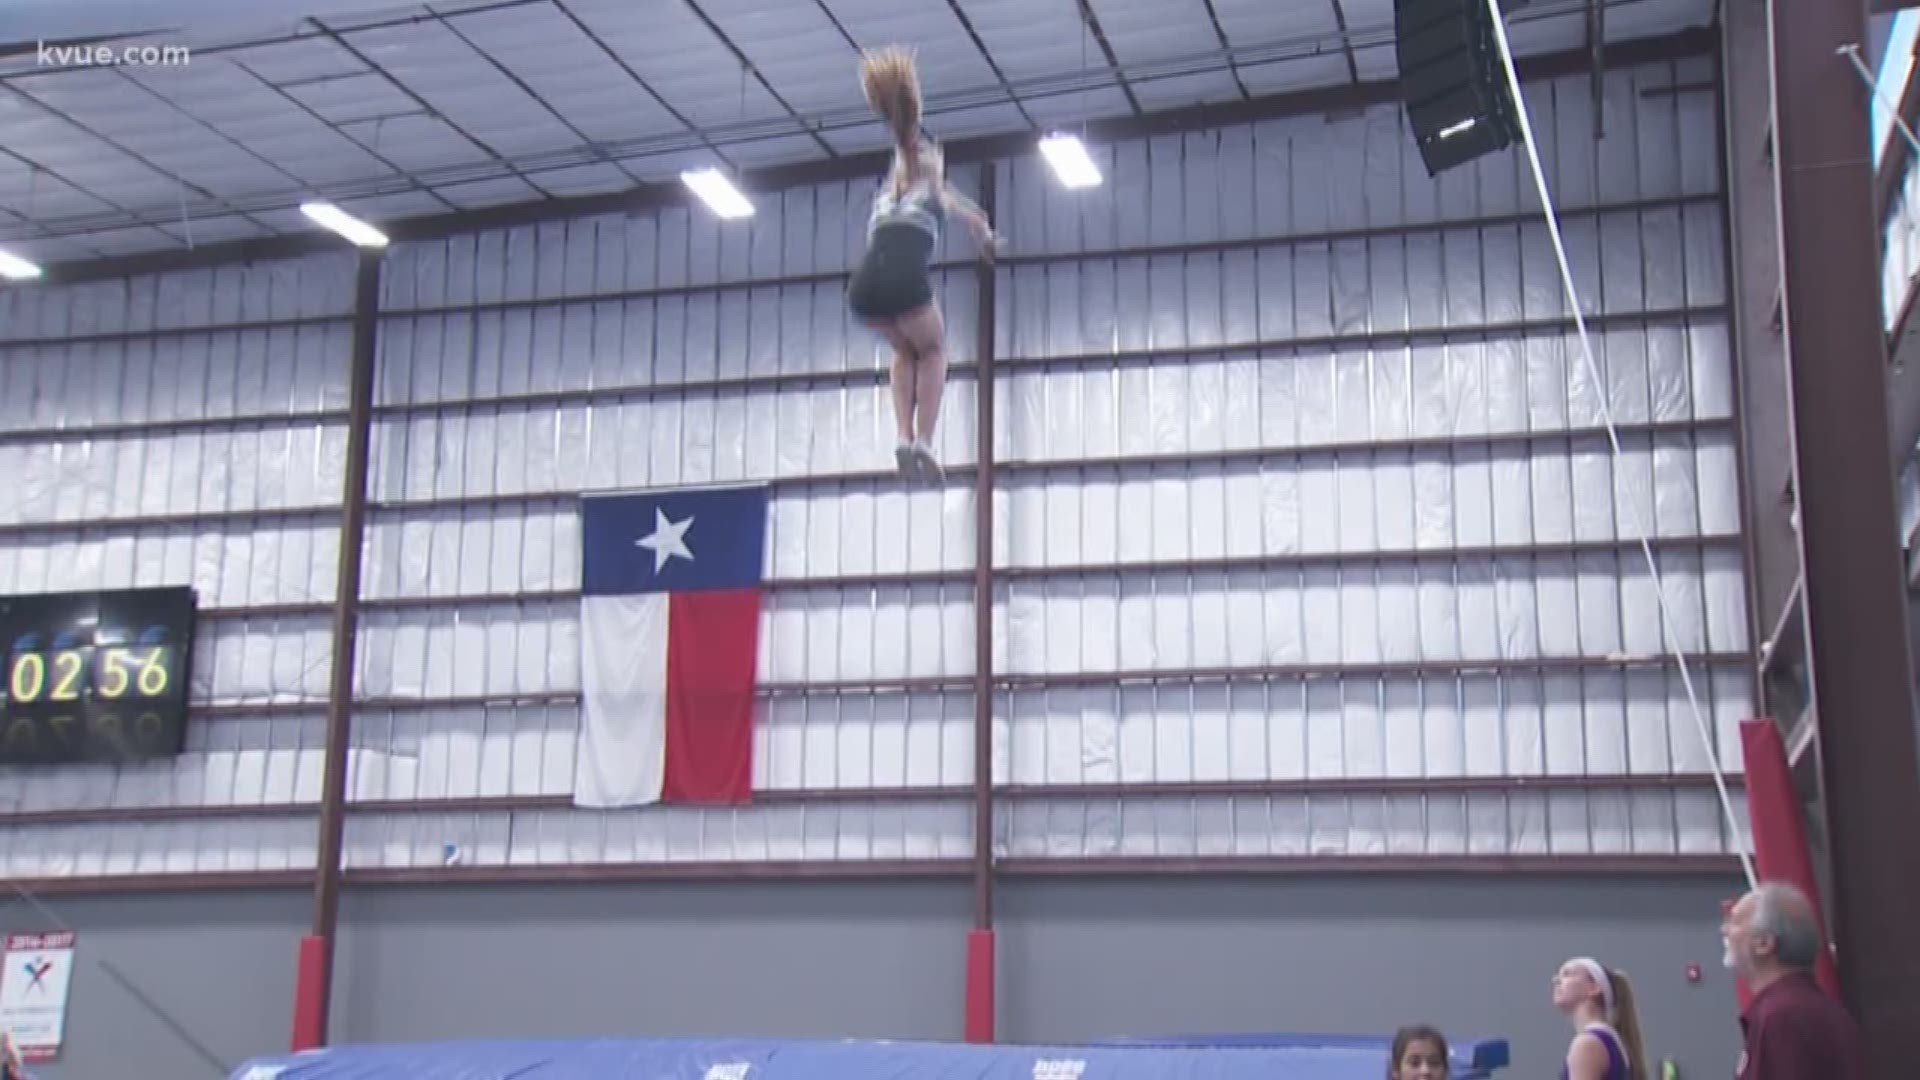 An Austin area teenager is gearing up for the regional and national championships in what's known as T&T gymnastics.